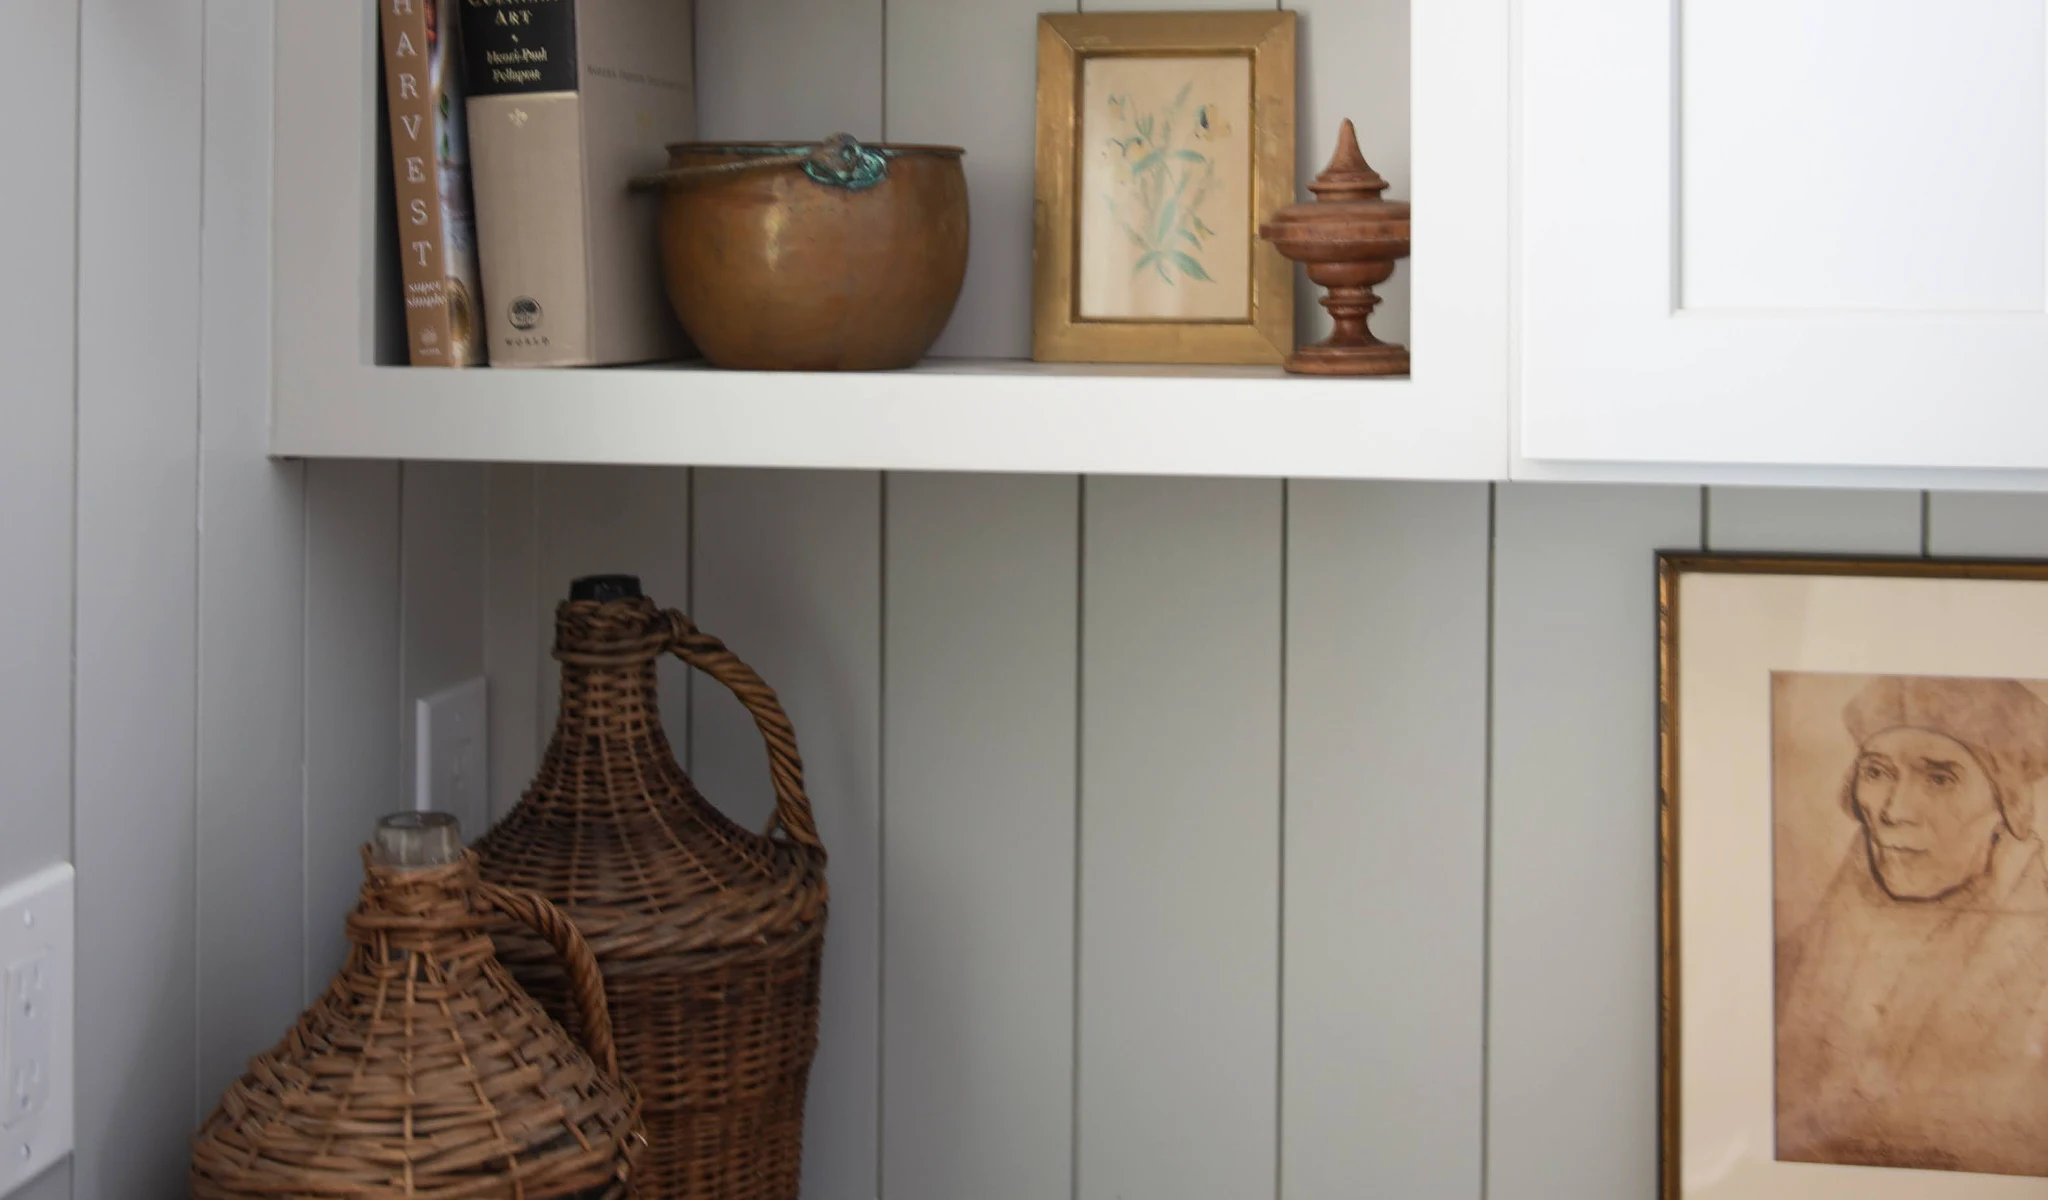 Wicker baskets and decor displayed on a white shelf.